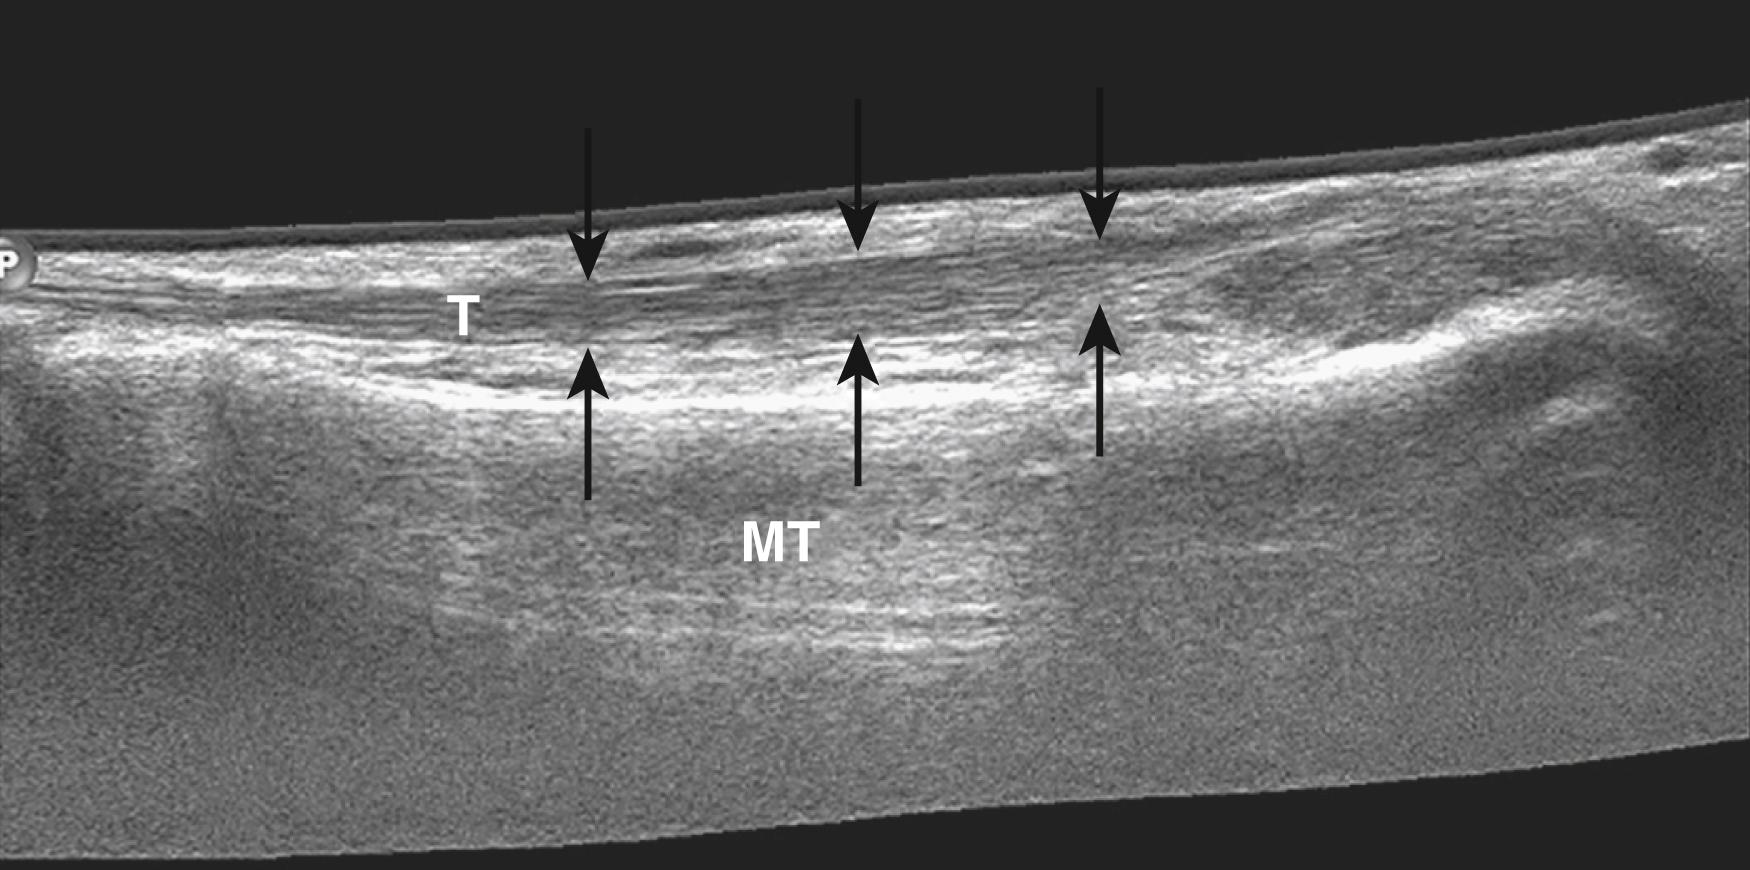 FIG. 191.4, Longitudinal extended field-of-view image of the extensor hallucis longus tendon (T) on the first metatarsal bone (MT) shows a diffusely thickened, hypoechoic tendon (arrows).